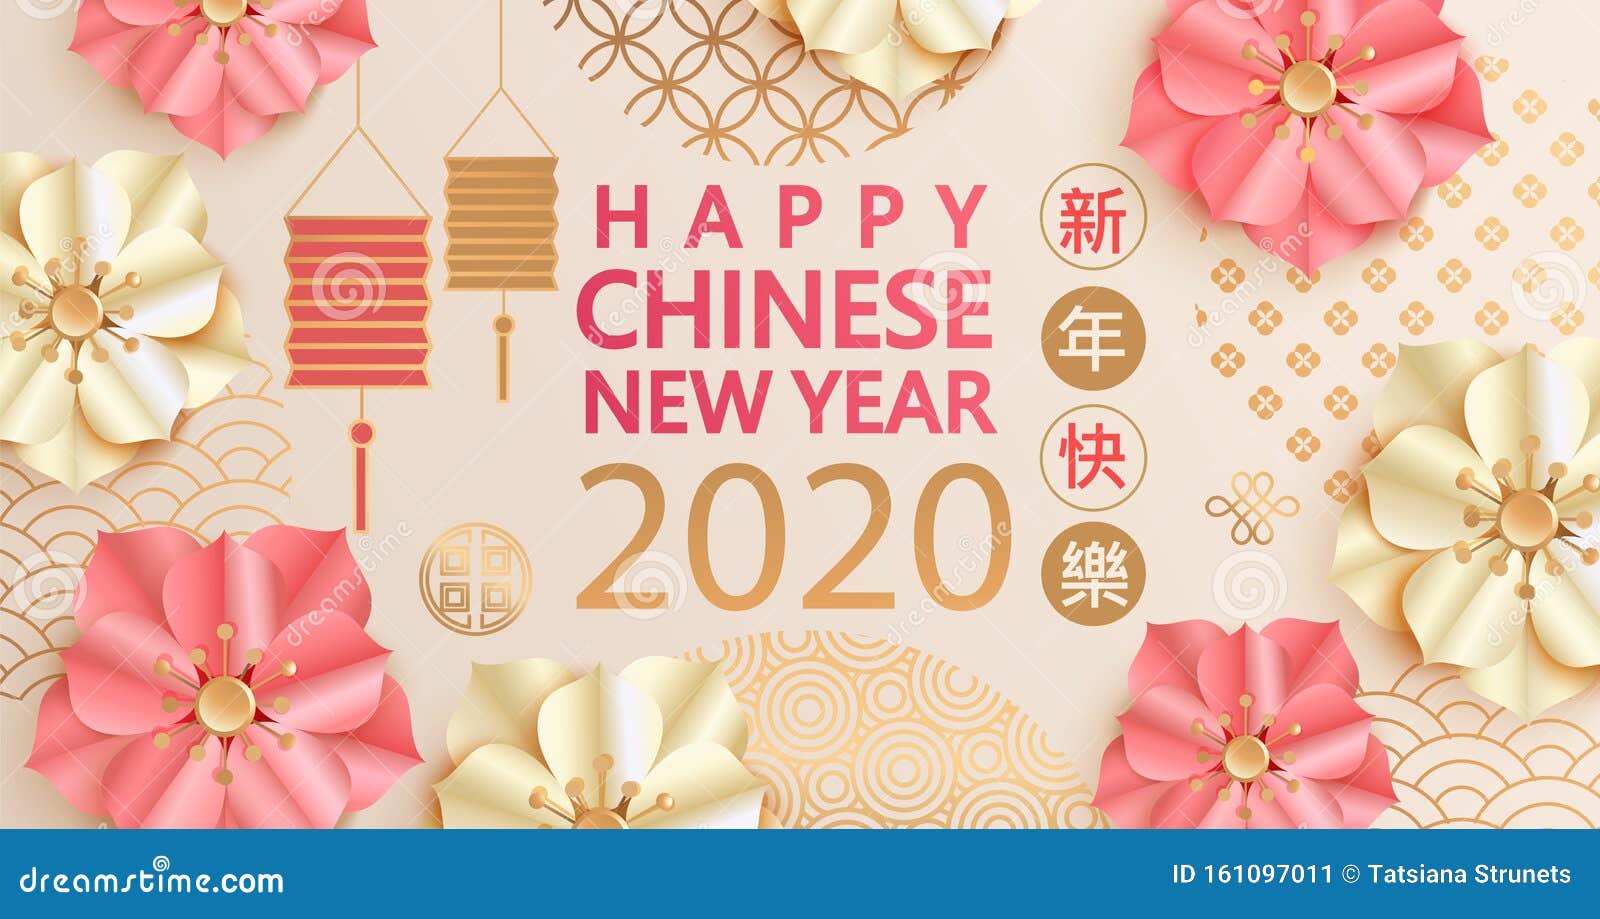 Happy Chinese New Year 2020,elegant Greeting Card. Stock Vector ...